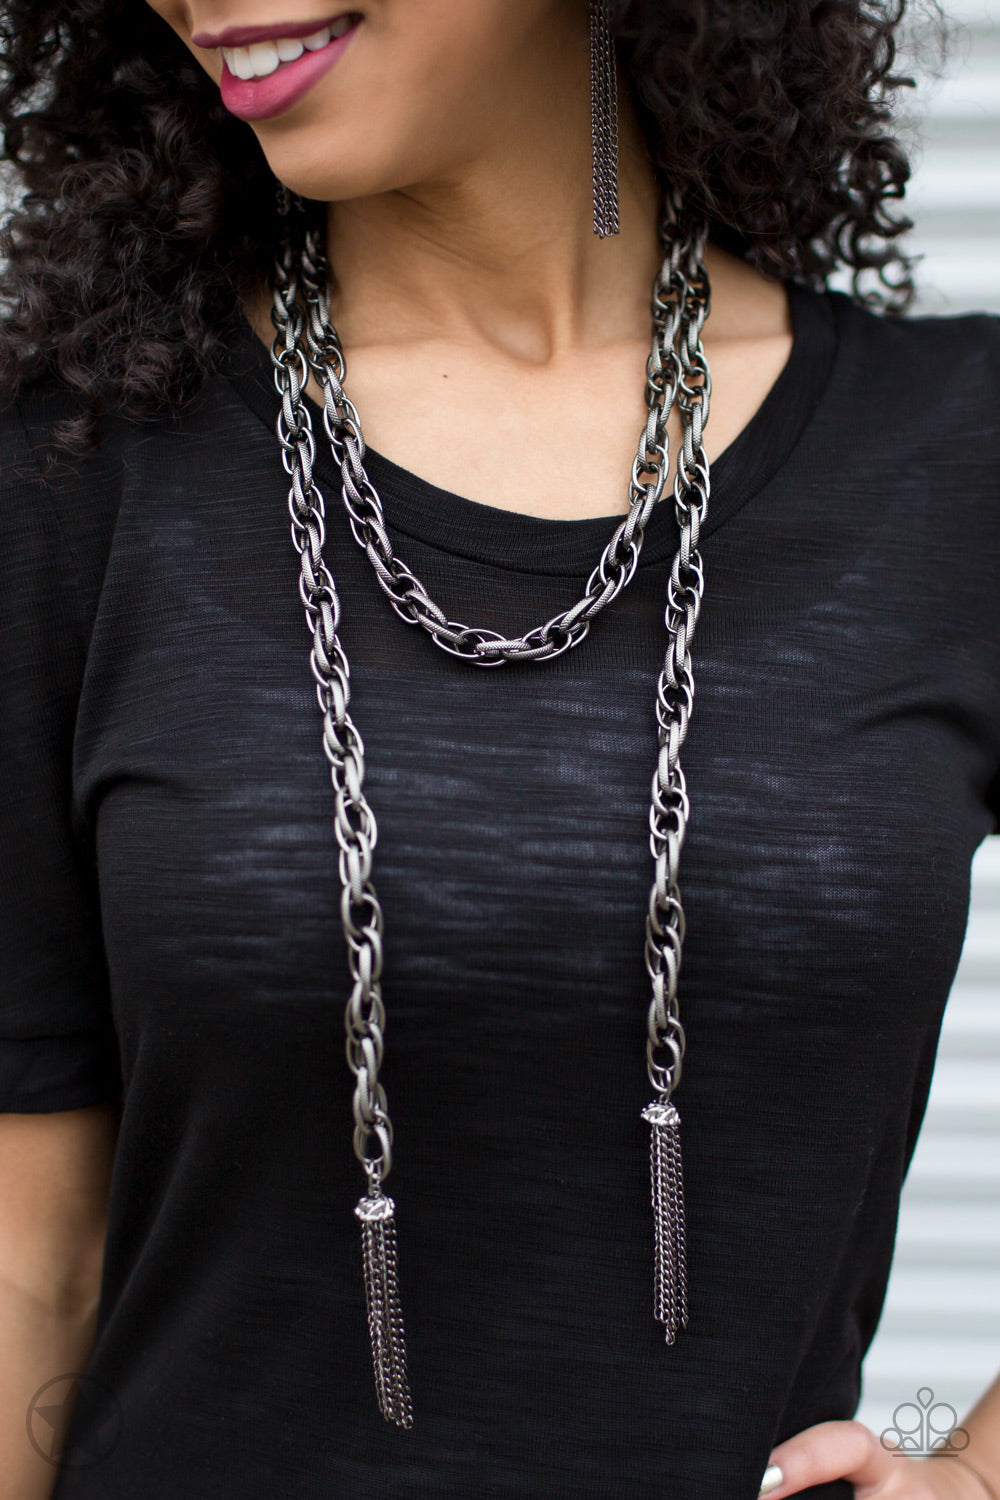 SCARFed for Attention - Gunmetal Scarf Necklace - Paparazzi Accessories - A single strand of spiraling, interlocking links with light-catching texture is anchored by two tassels of chain that add dramatic length to the piece. Undeniably the most versatile piece in Paparazzi's history, the scarf necklace features FIVE different ways to accessorize.